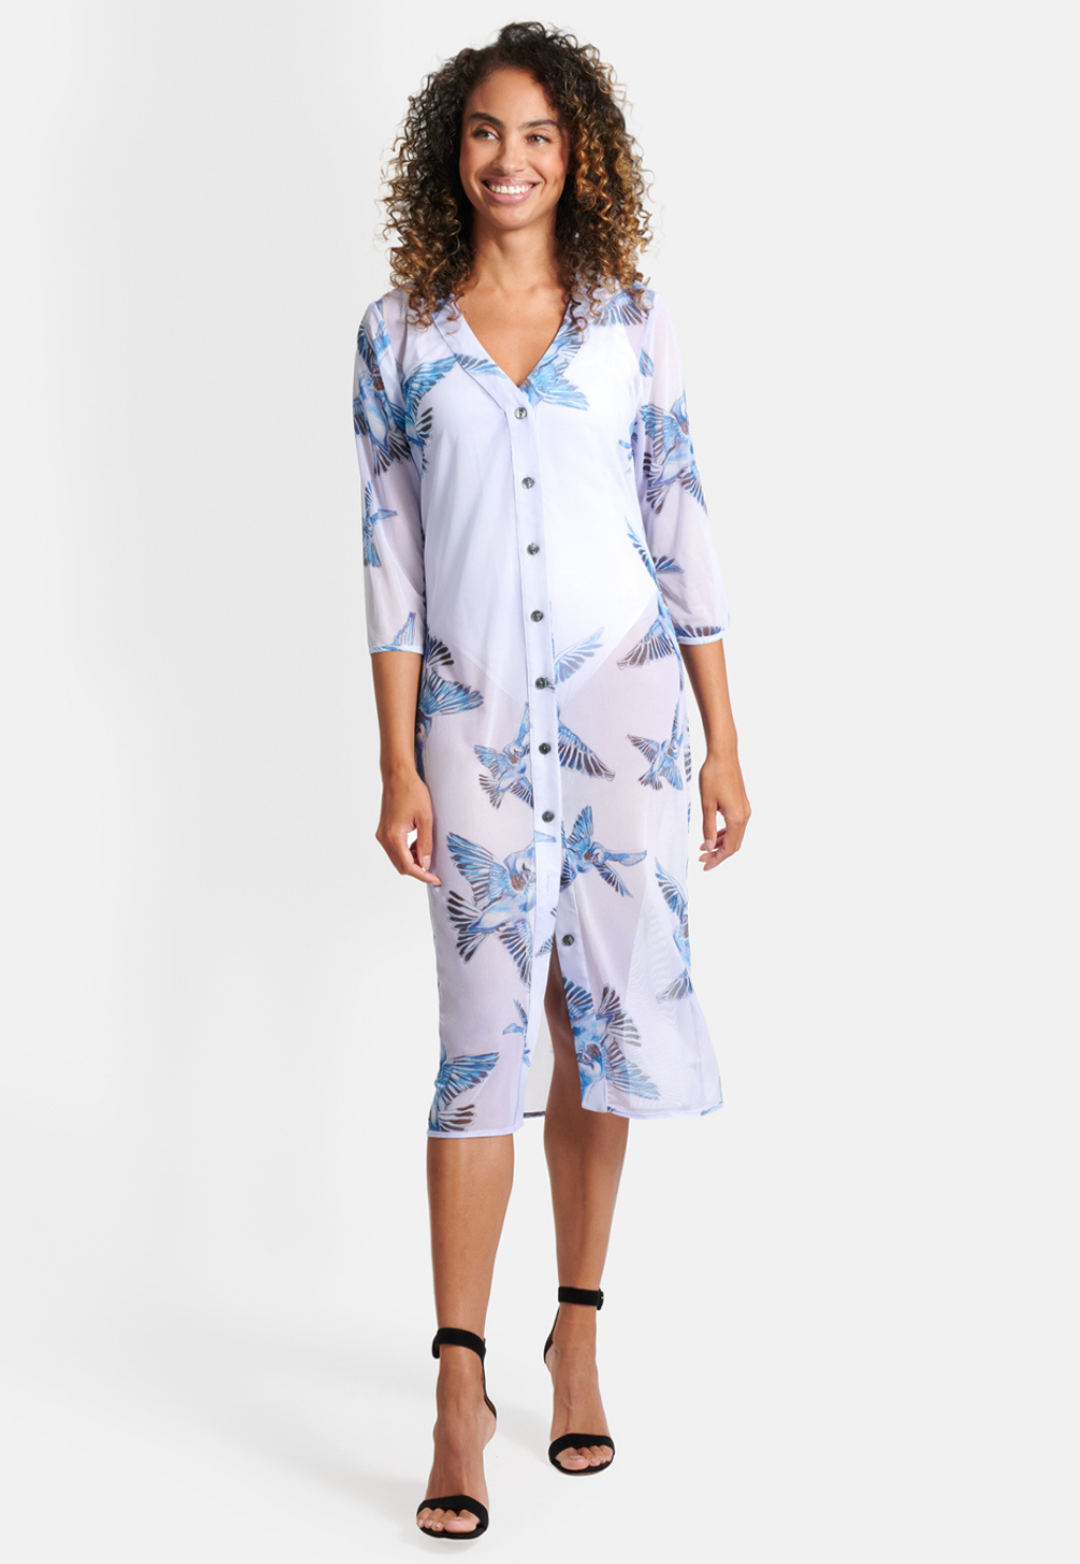 Woman wearing love birds printed lavender mesh cardigan with three quarter sleeves and button down front over a bathing suit by Ala von Auersperg